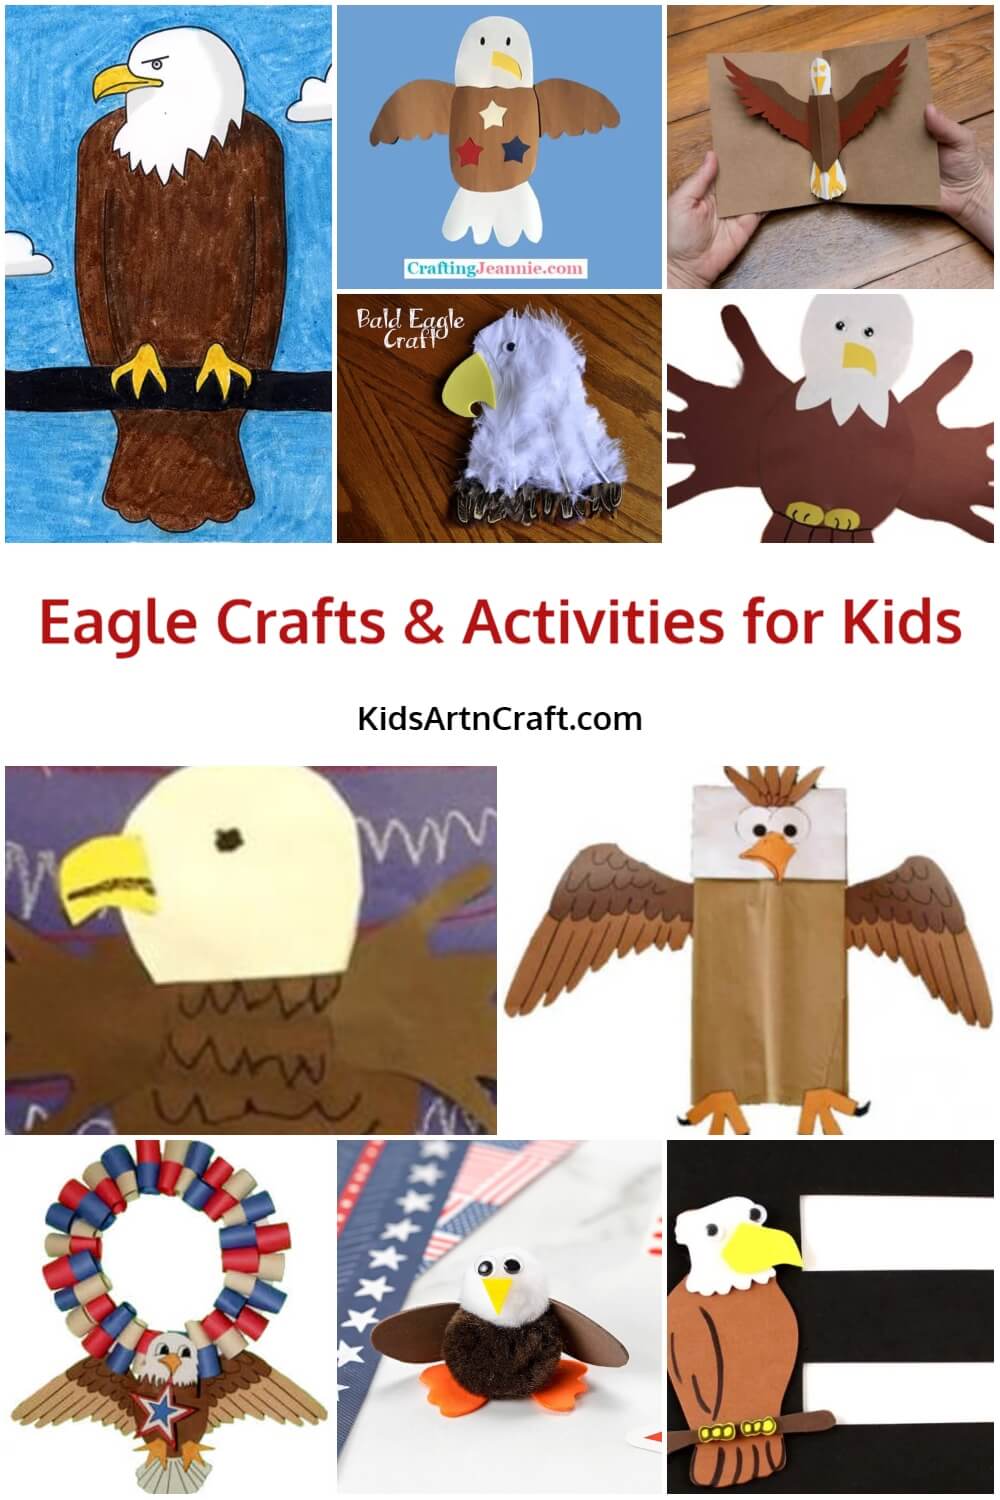 Eagle Crafts & Activities for Kids